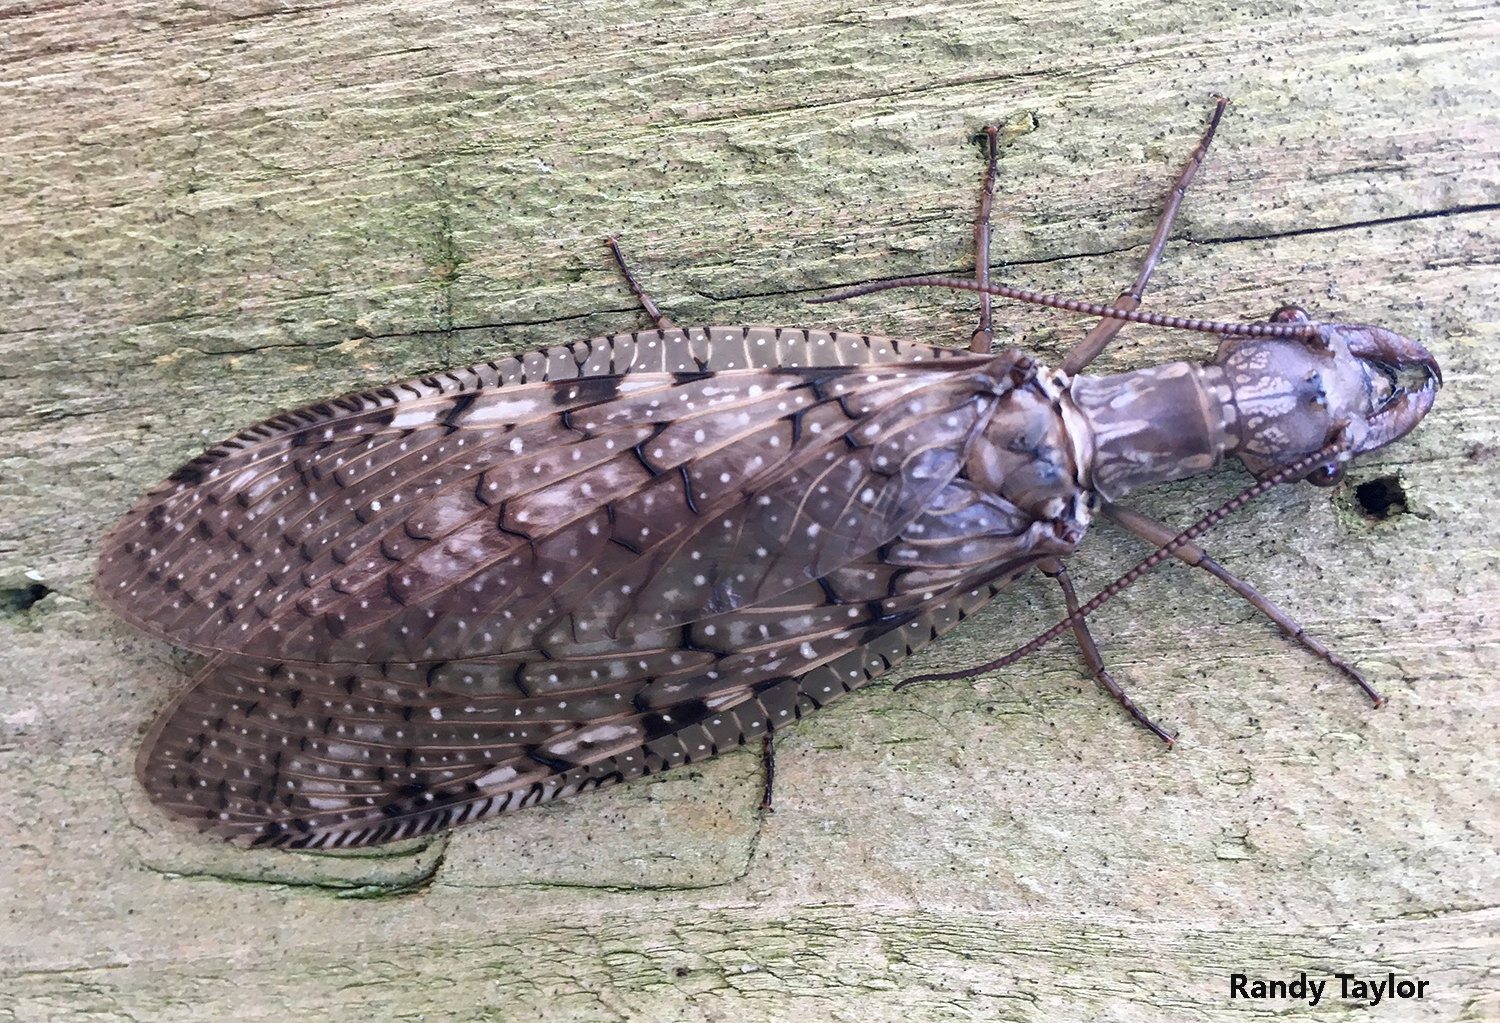 What is that strange big insect? Dobsonflies, hellgrammites, and